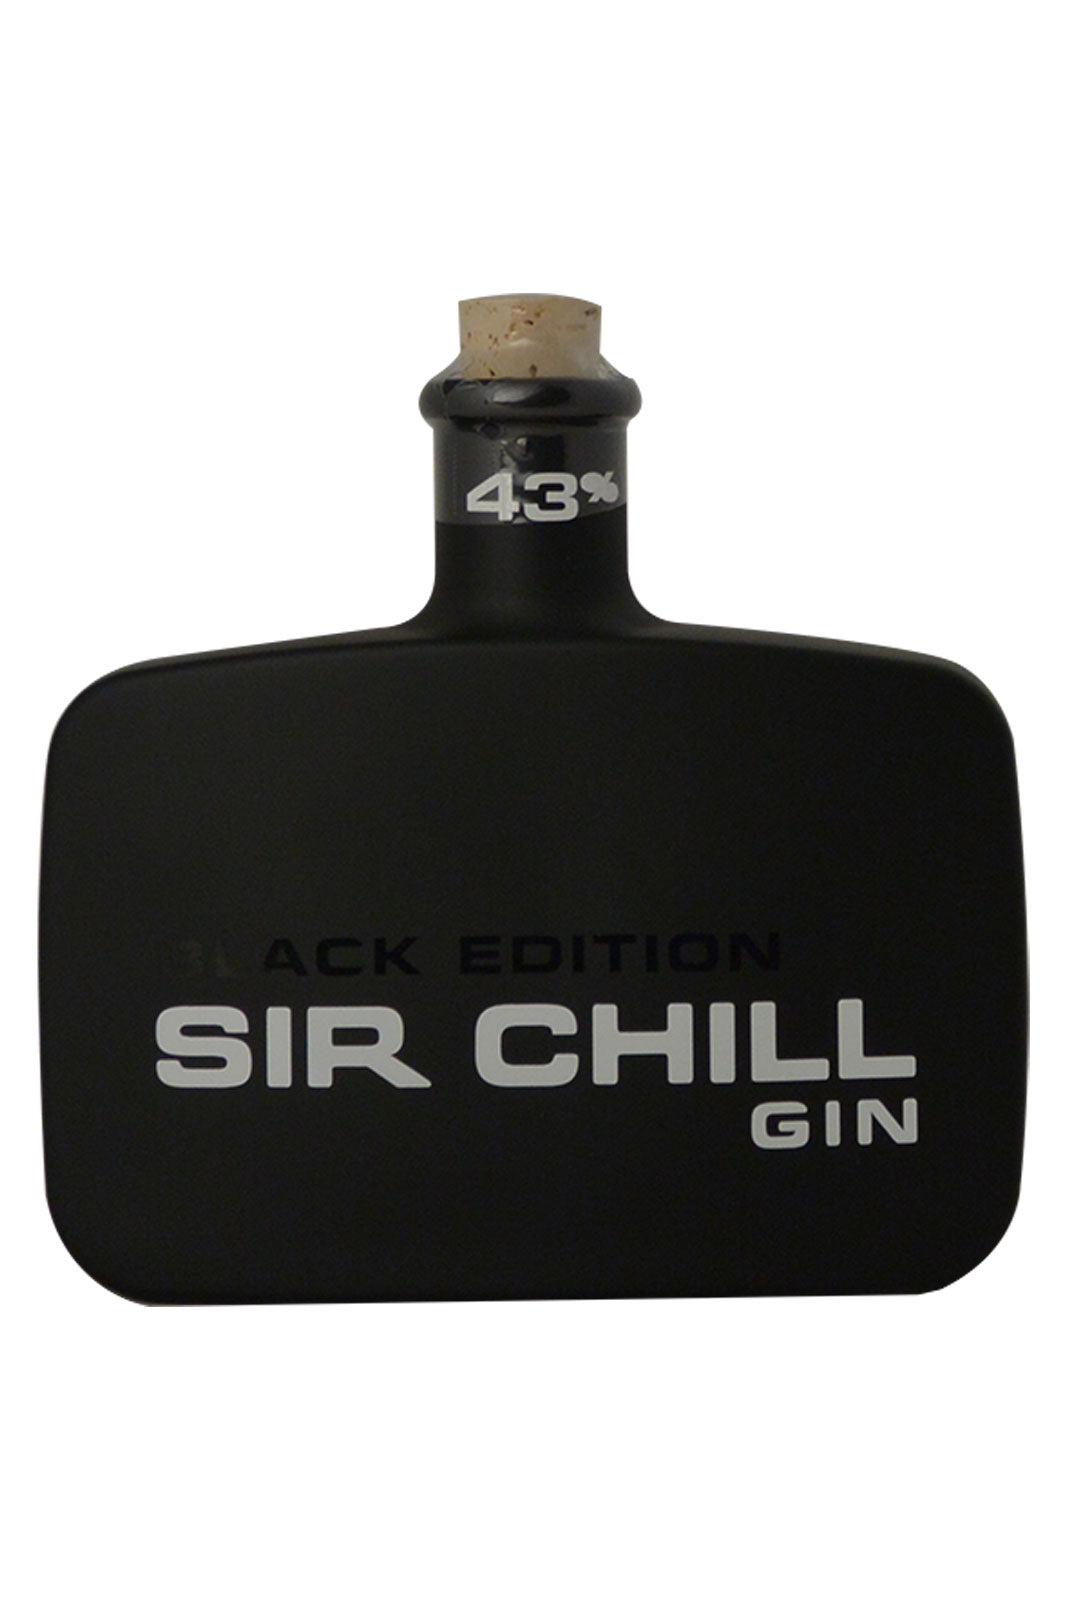 Sir Chill Gin - The Black Edition